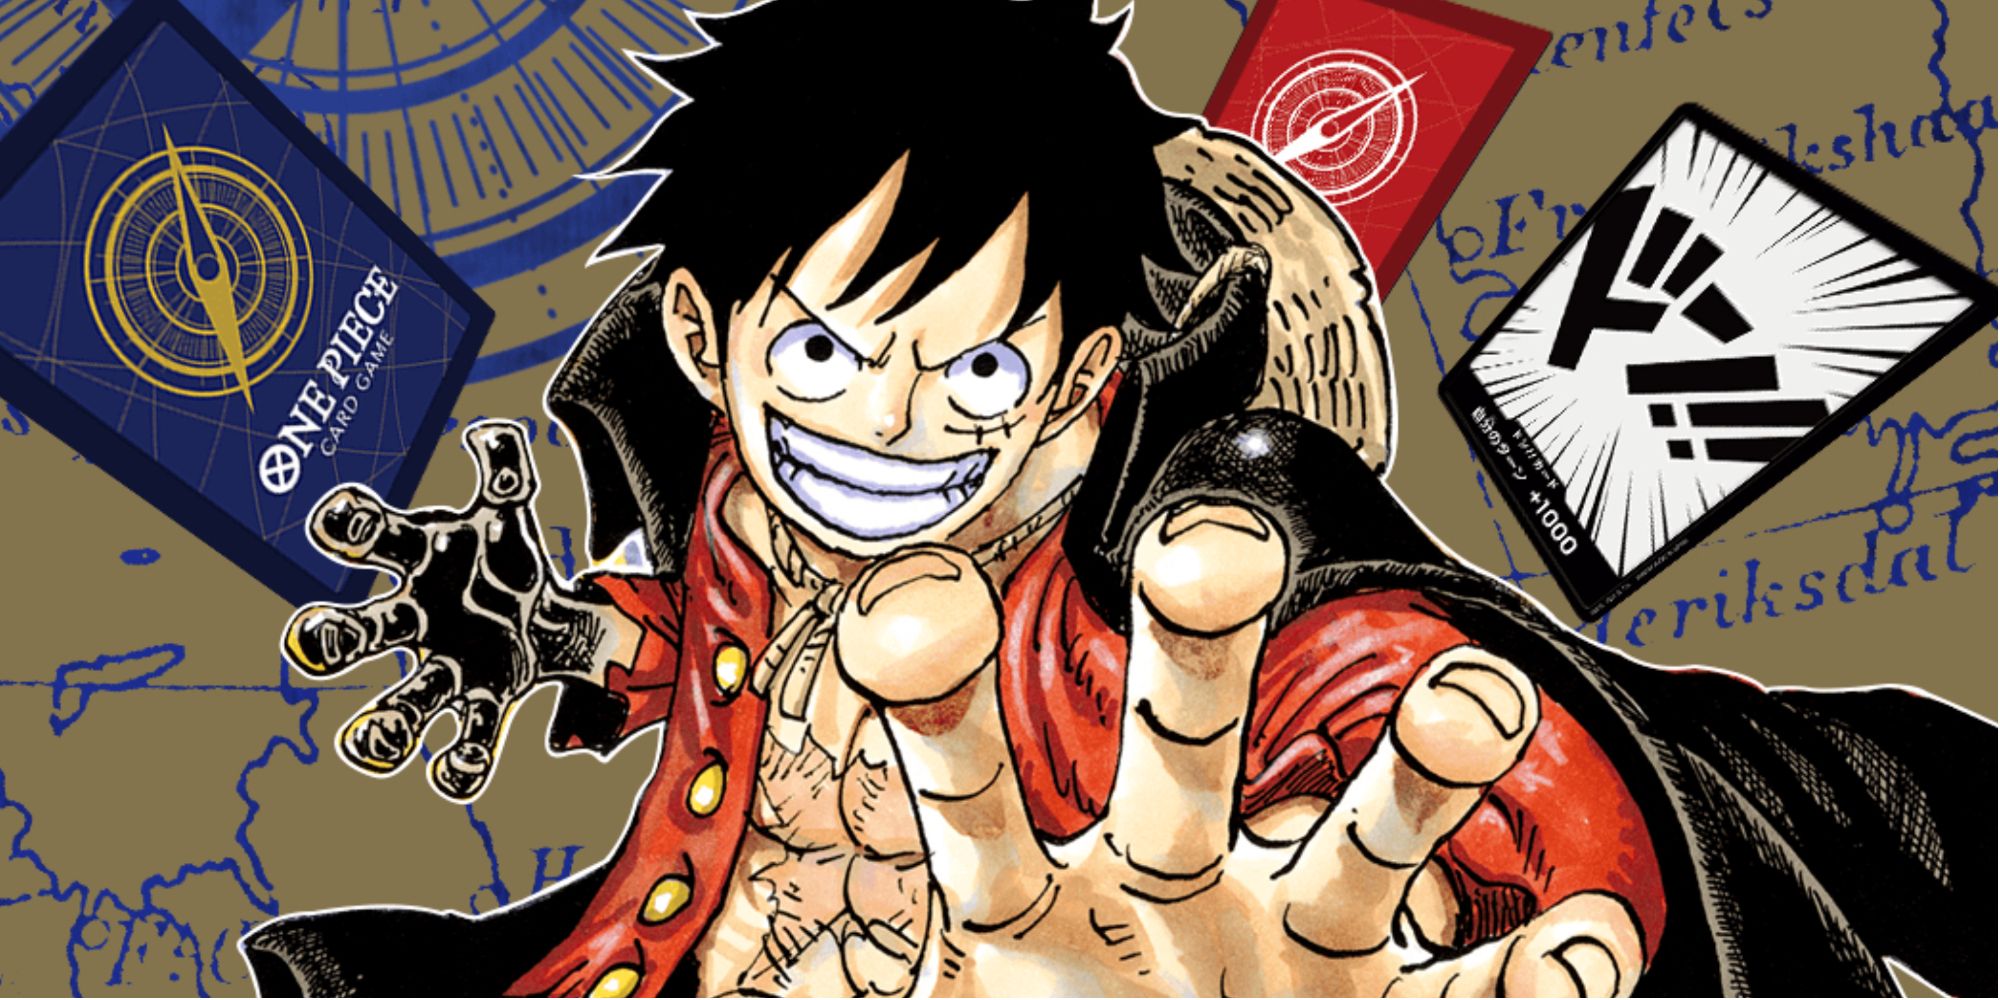 Teaching App for ONE PIECE CARD GAME has been released! − TOPICS